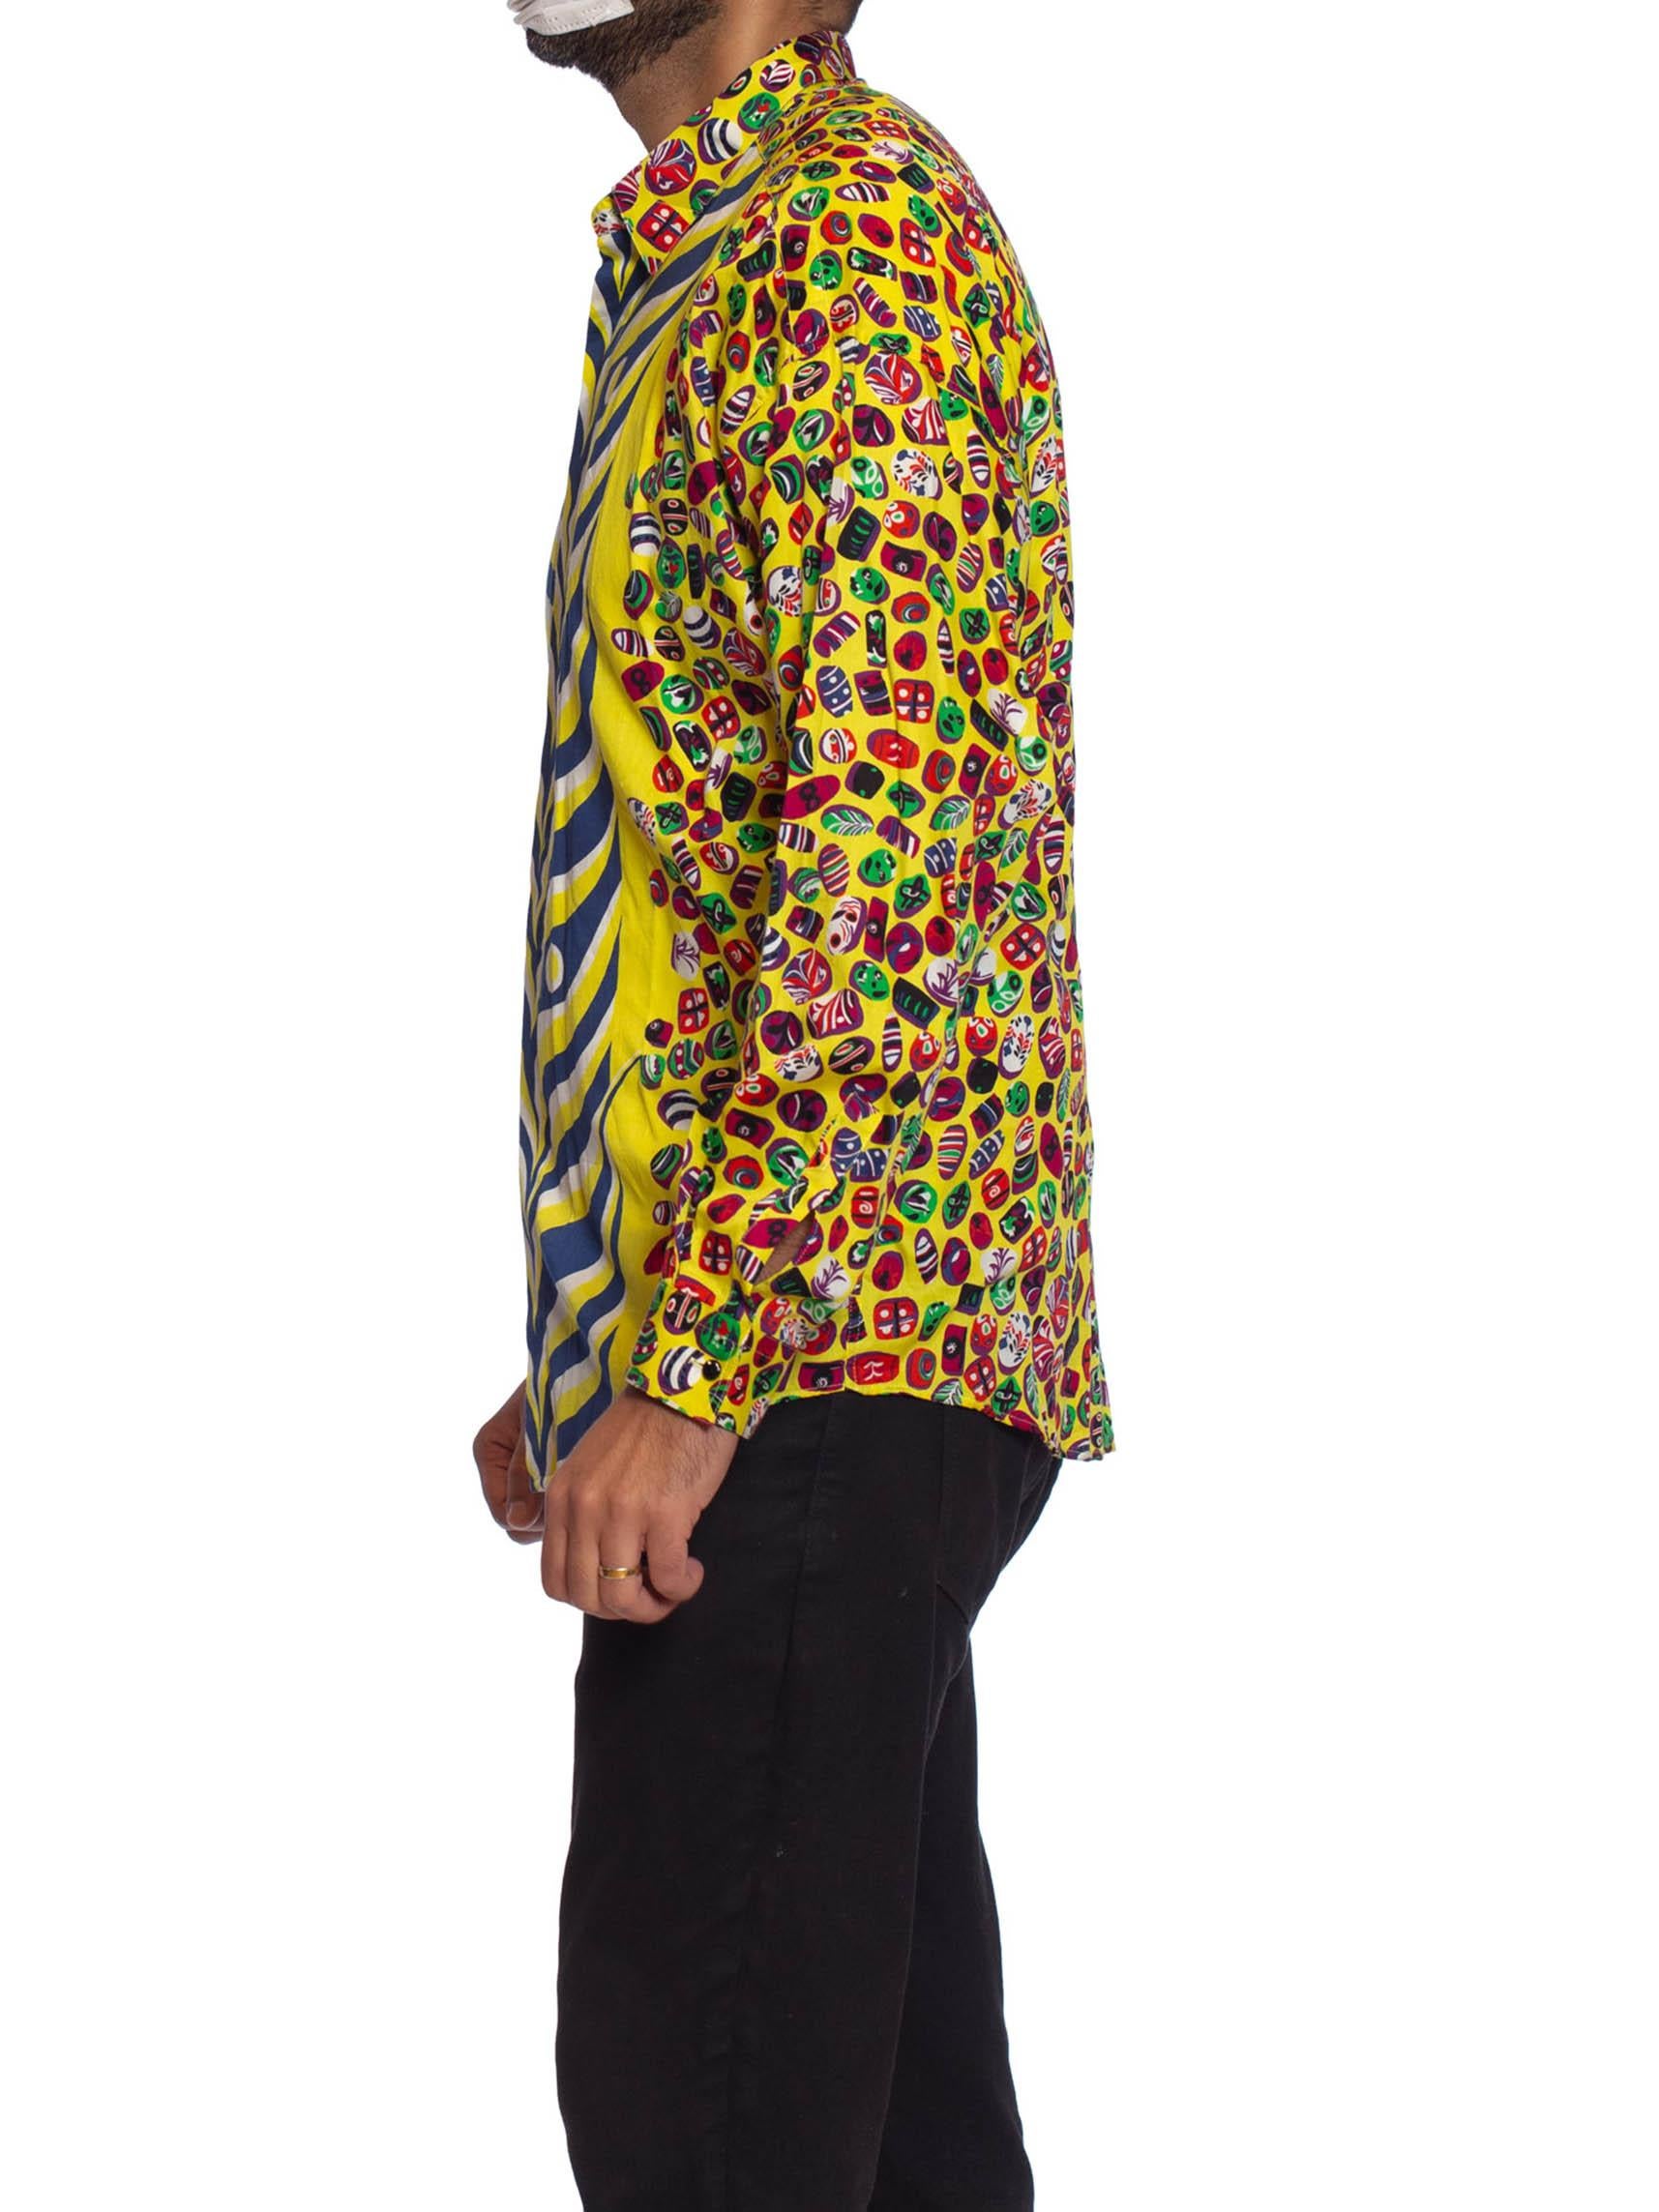 1990S GIANNI VERSACE Printed Cotton Lawn Men's Shirt With Japanese Inspired Print